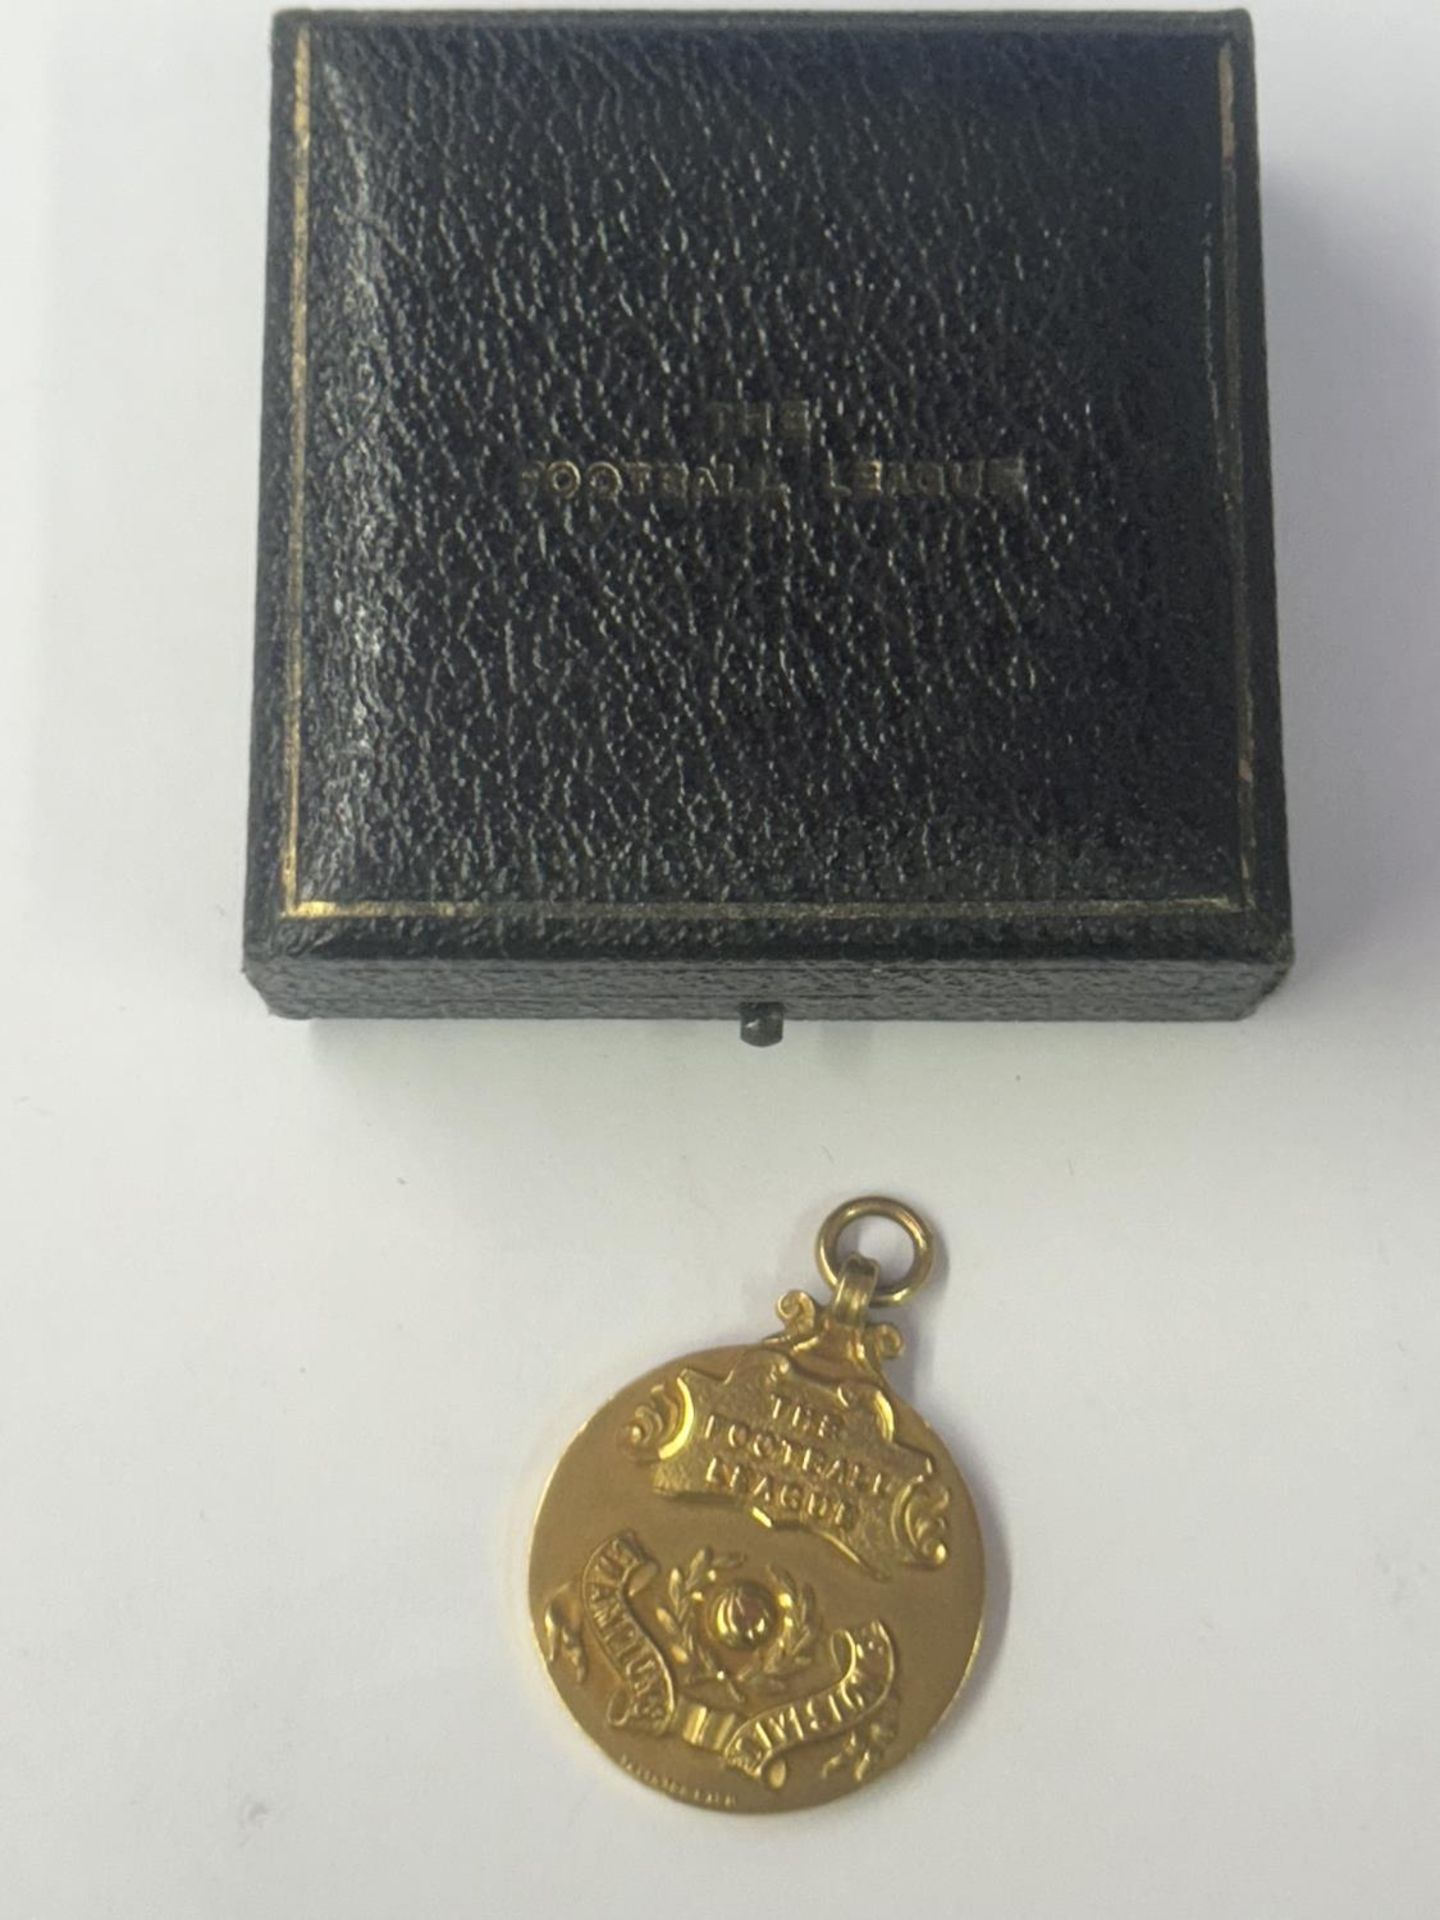 A HALLMARKED 9 CARAT GOLD FOOTBALL LEAGUE DIVISION 3 LEAGUE WINNERS MEDAL 1967-1968 SEASON, BY - Image 5 of 5